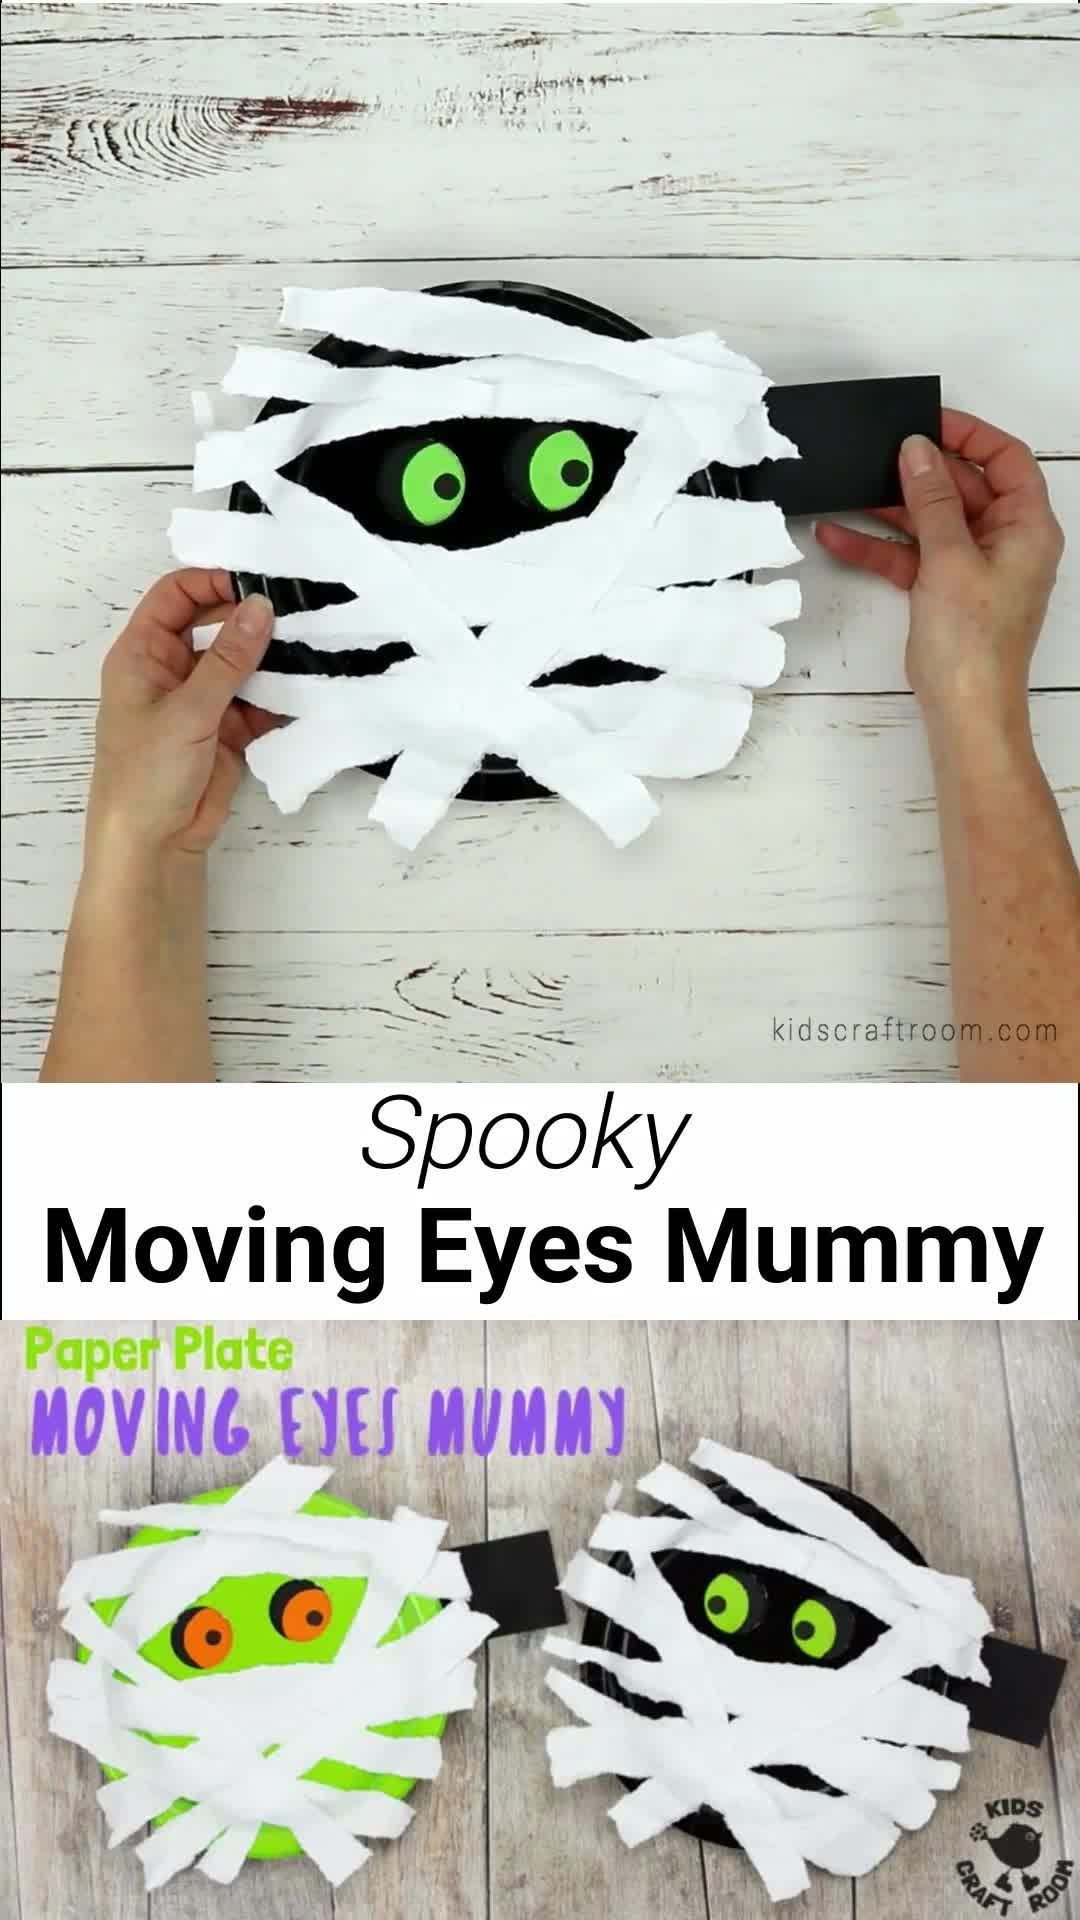 Moving Eyes Paper Plate Mummy Craft -   17 diy projects Baby craft ideas